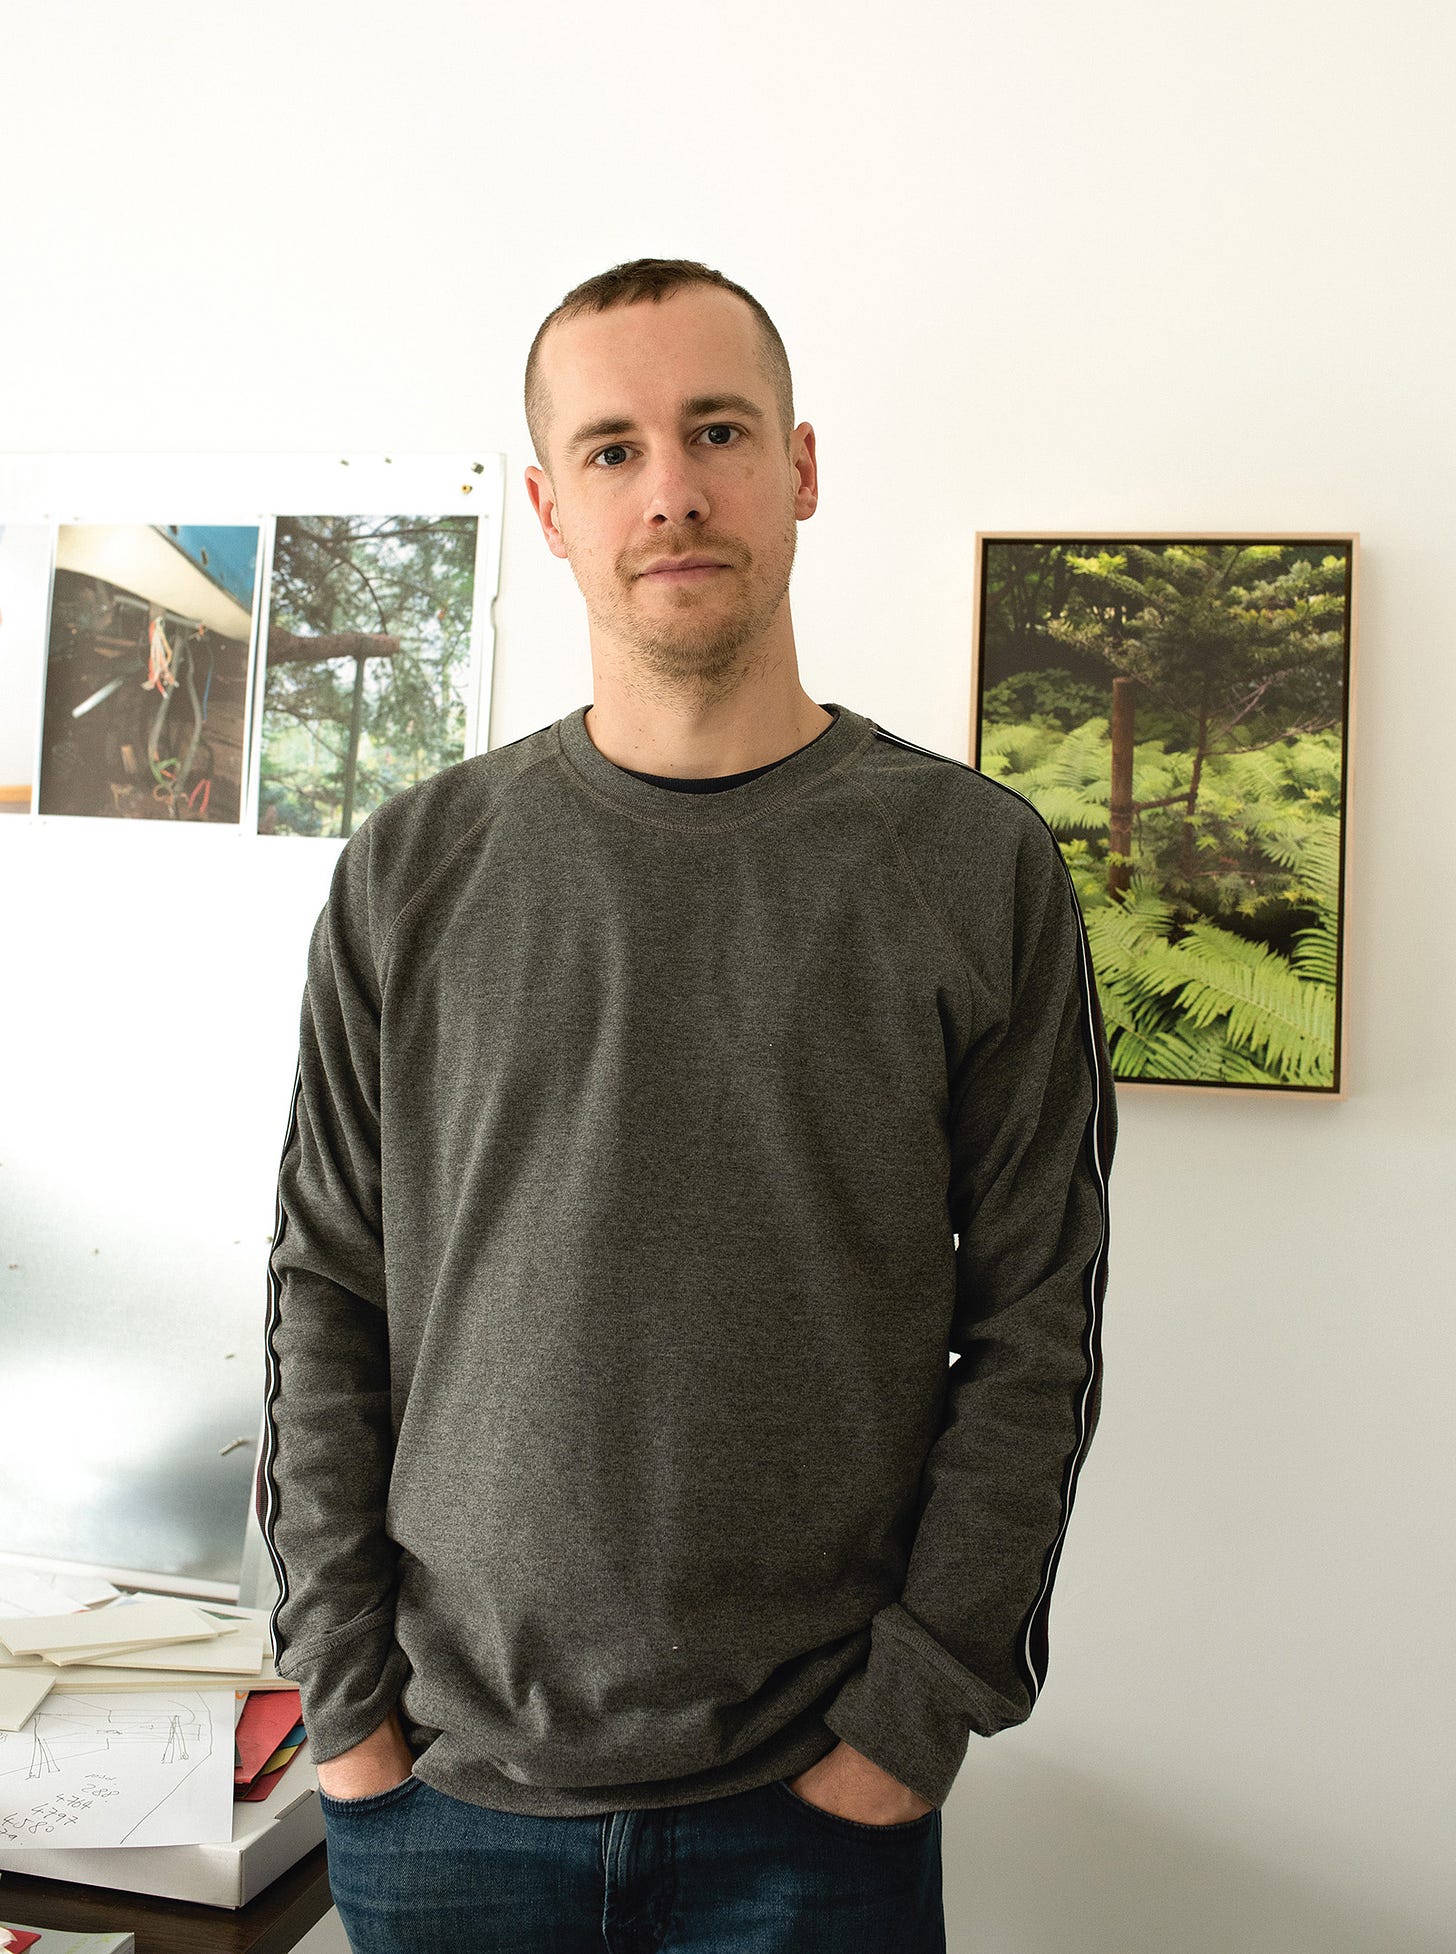 Rob Crosse standing in his studio with photos of woodland on the walls behind him